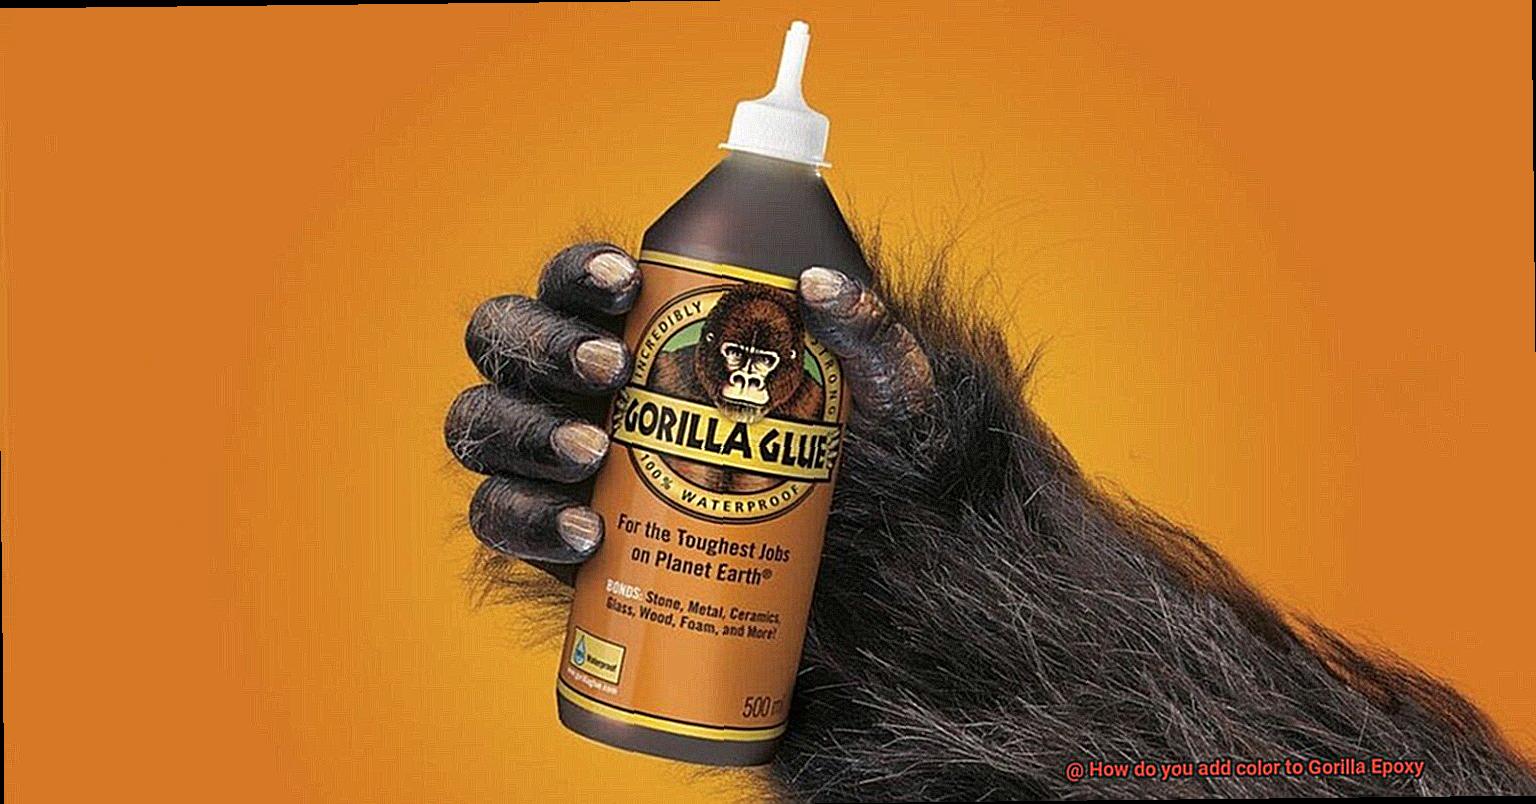 How do you add color to Gorilla Epoxy-6